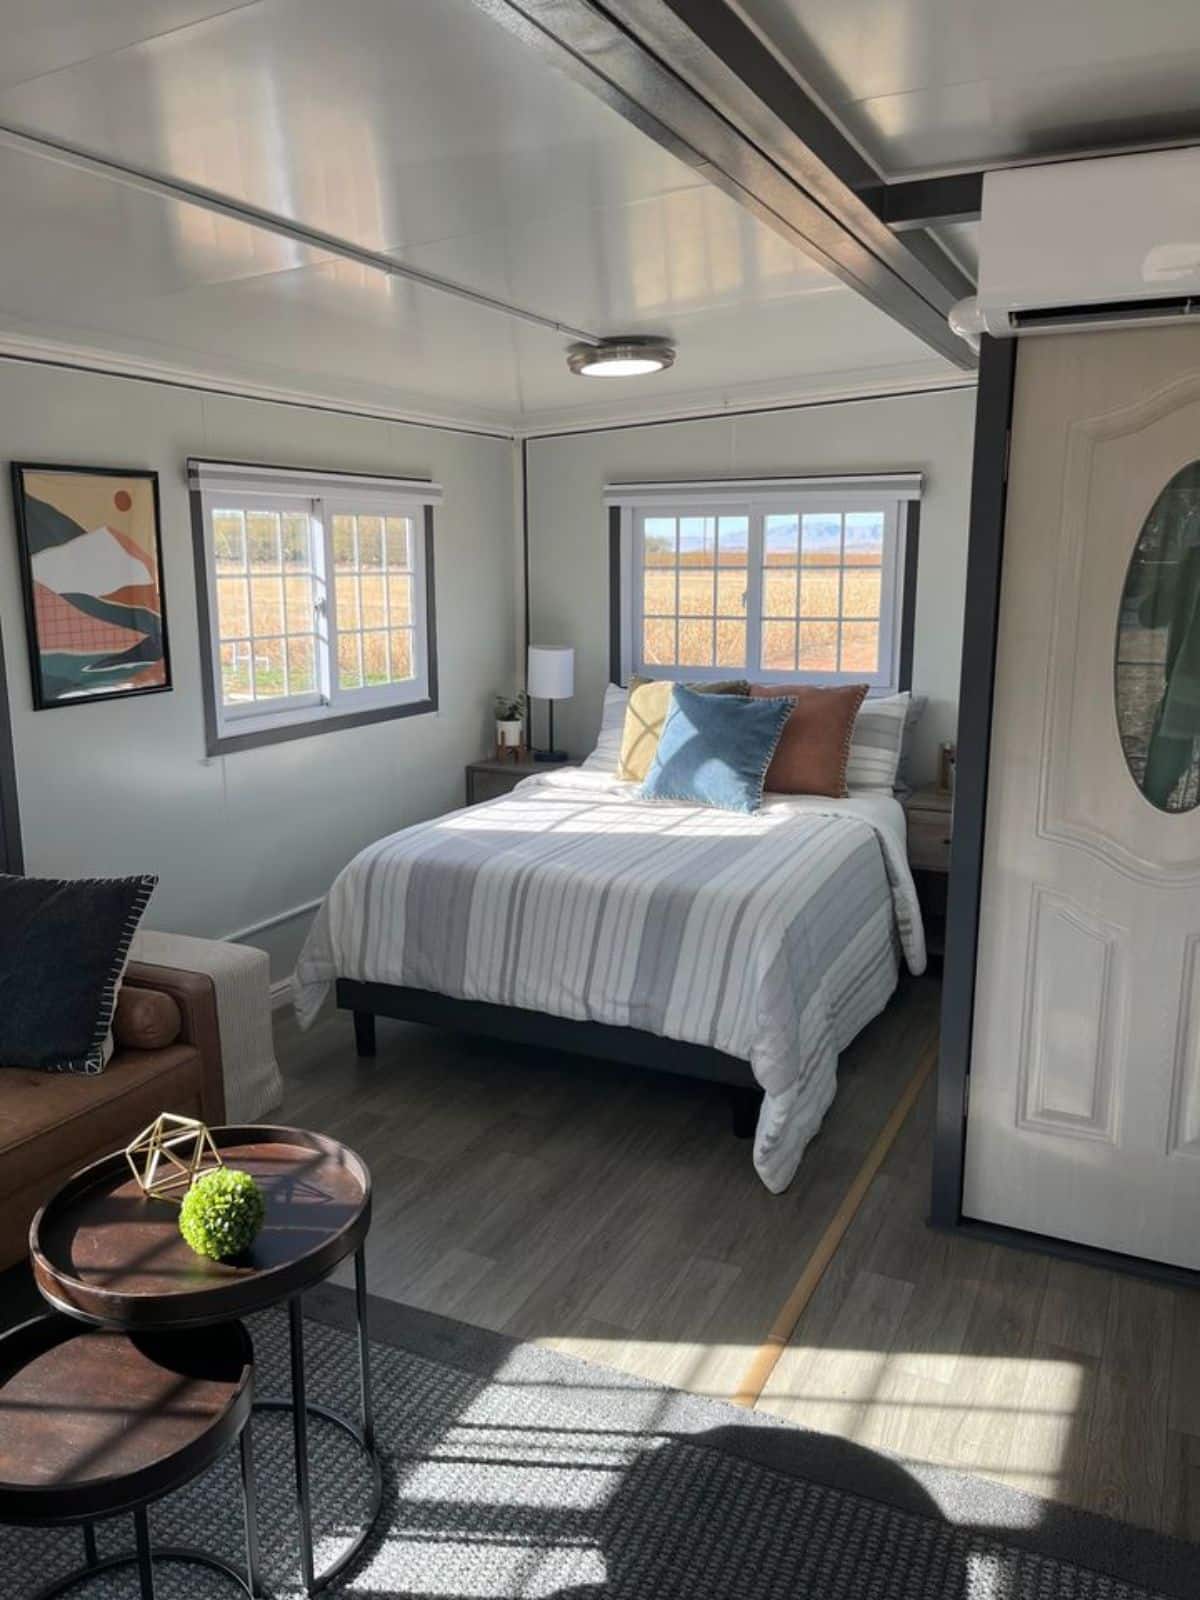 Bedroom side view of 20’ unique tiny home